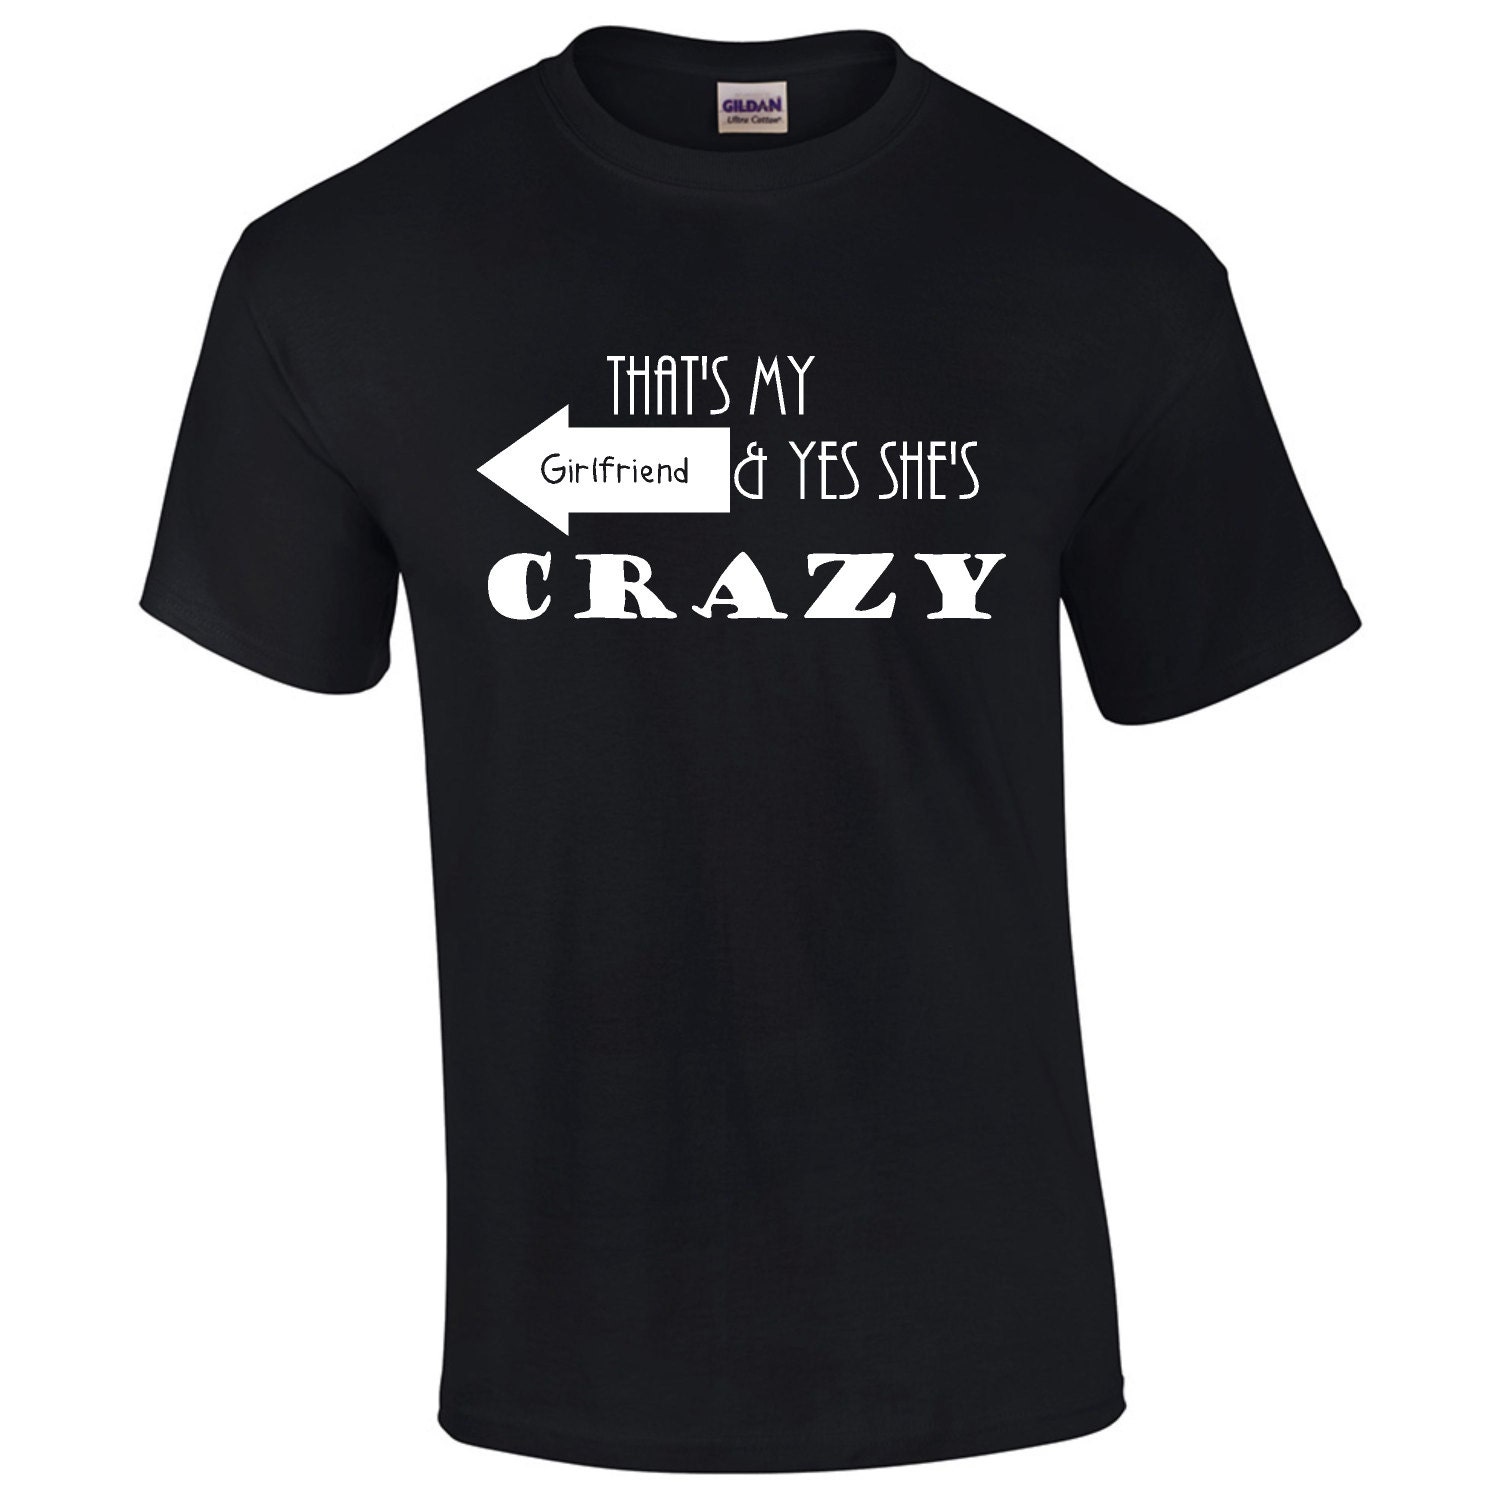 That's My Girlfriend And Yes She's Crazy T-Shirt Funny